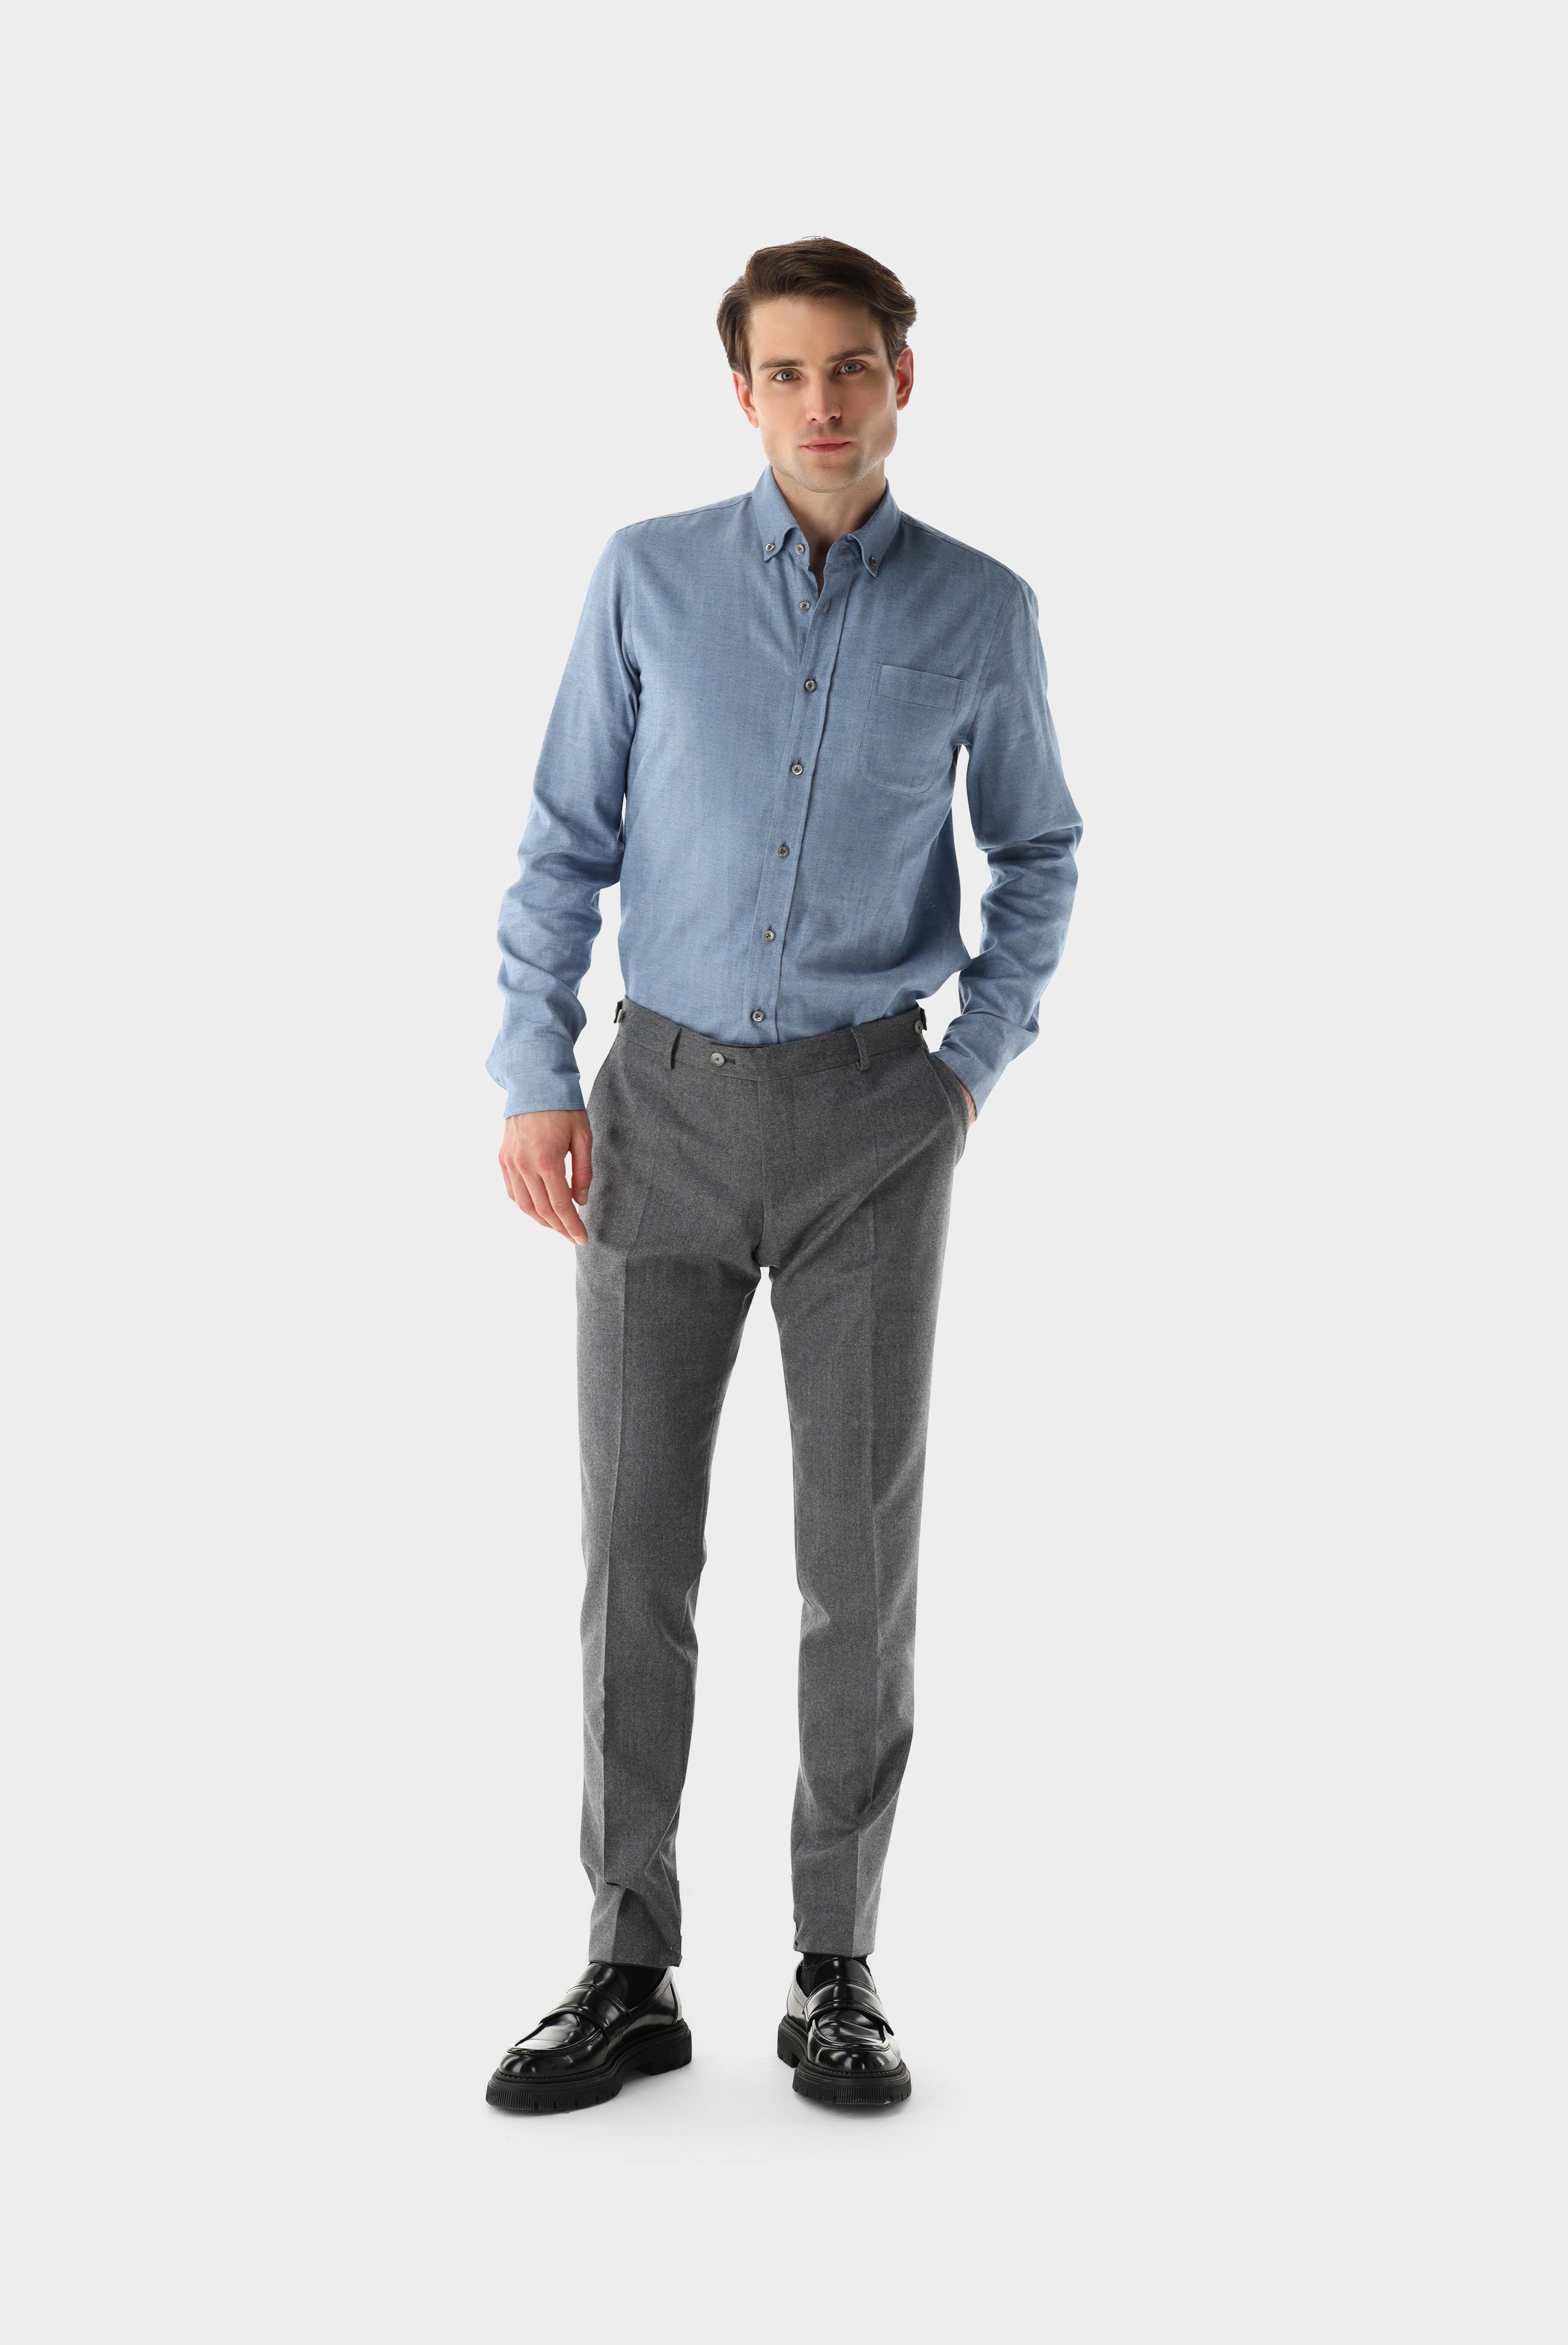 Casual Hemden+Button-Down Flanellhemd Tailor Fit+20.2013.9V.155045.770.38